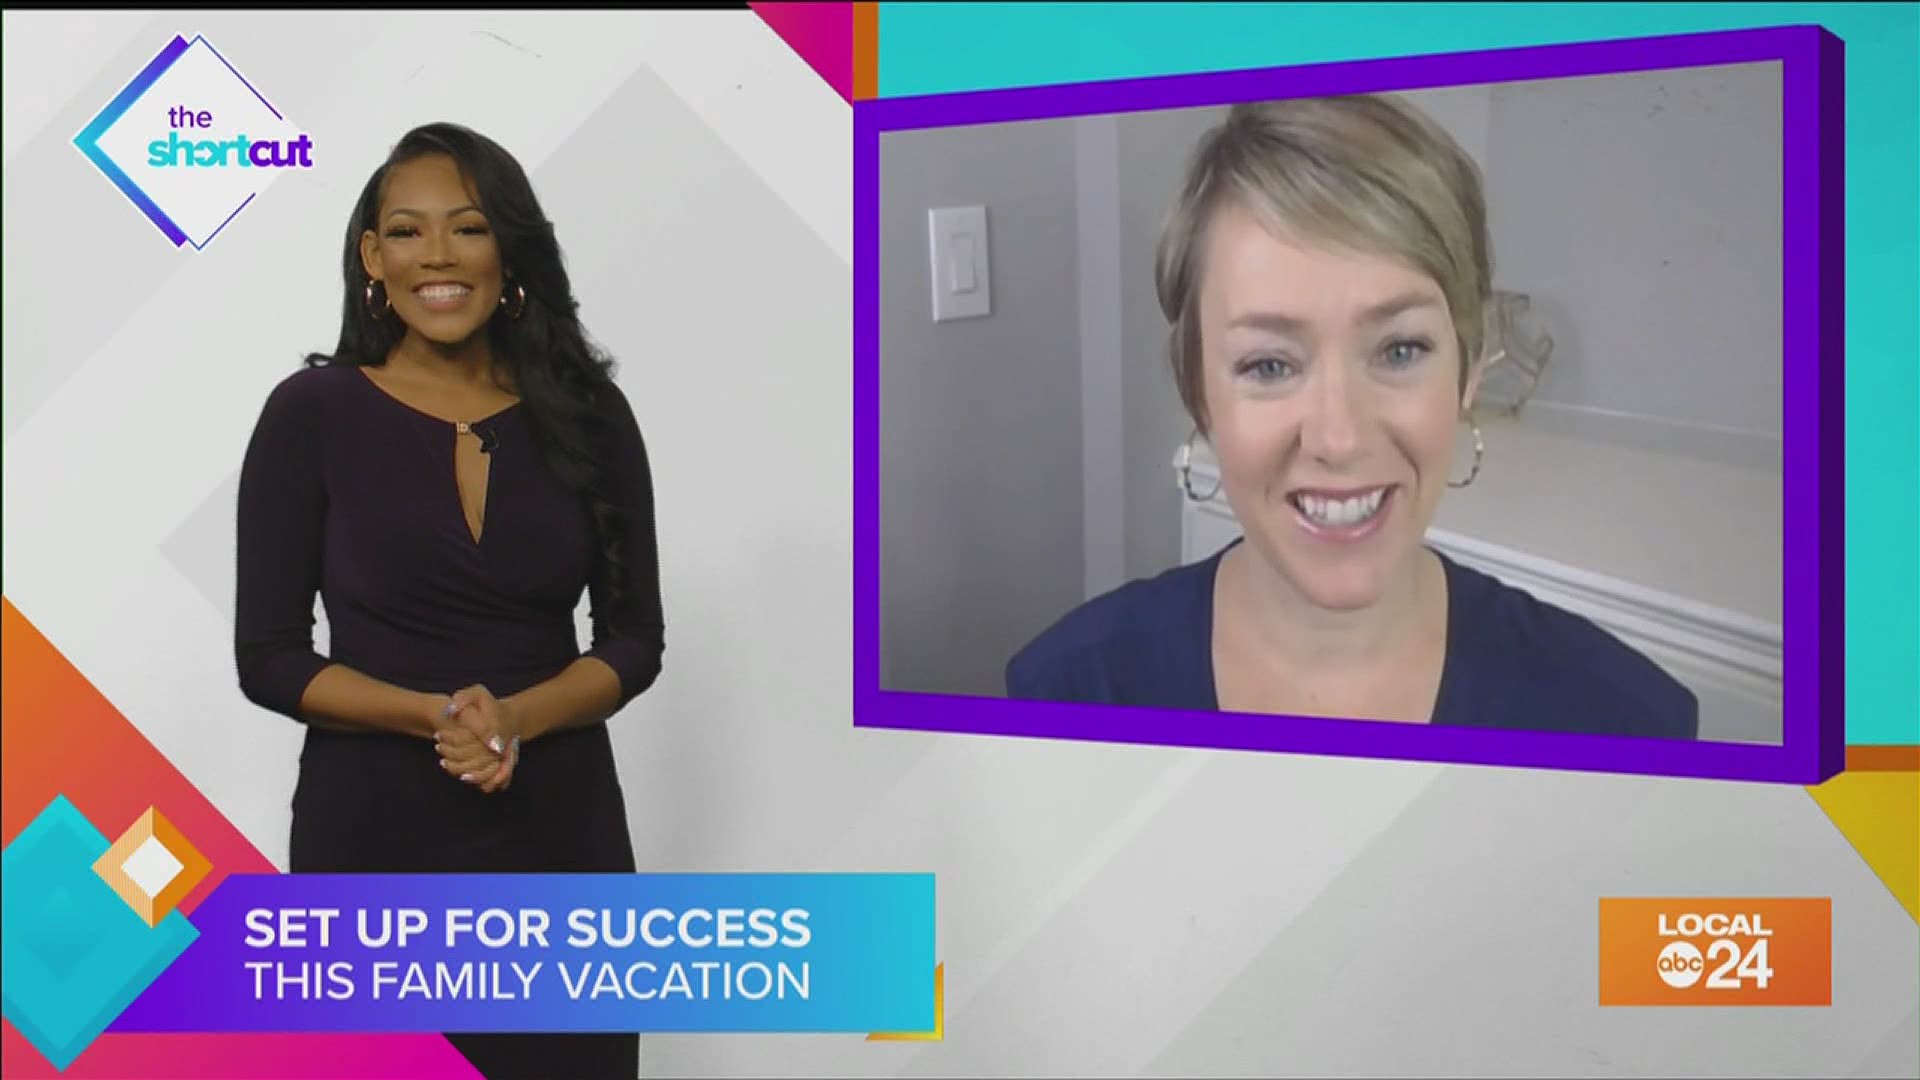 Join Sydney Neely and Dr. Rebecca Jackson as we take a look at some quick tips on how parents can travel with children who have ADHD, anxiety, and other conditions.